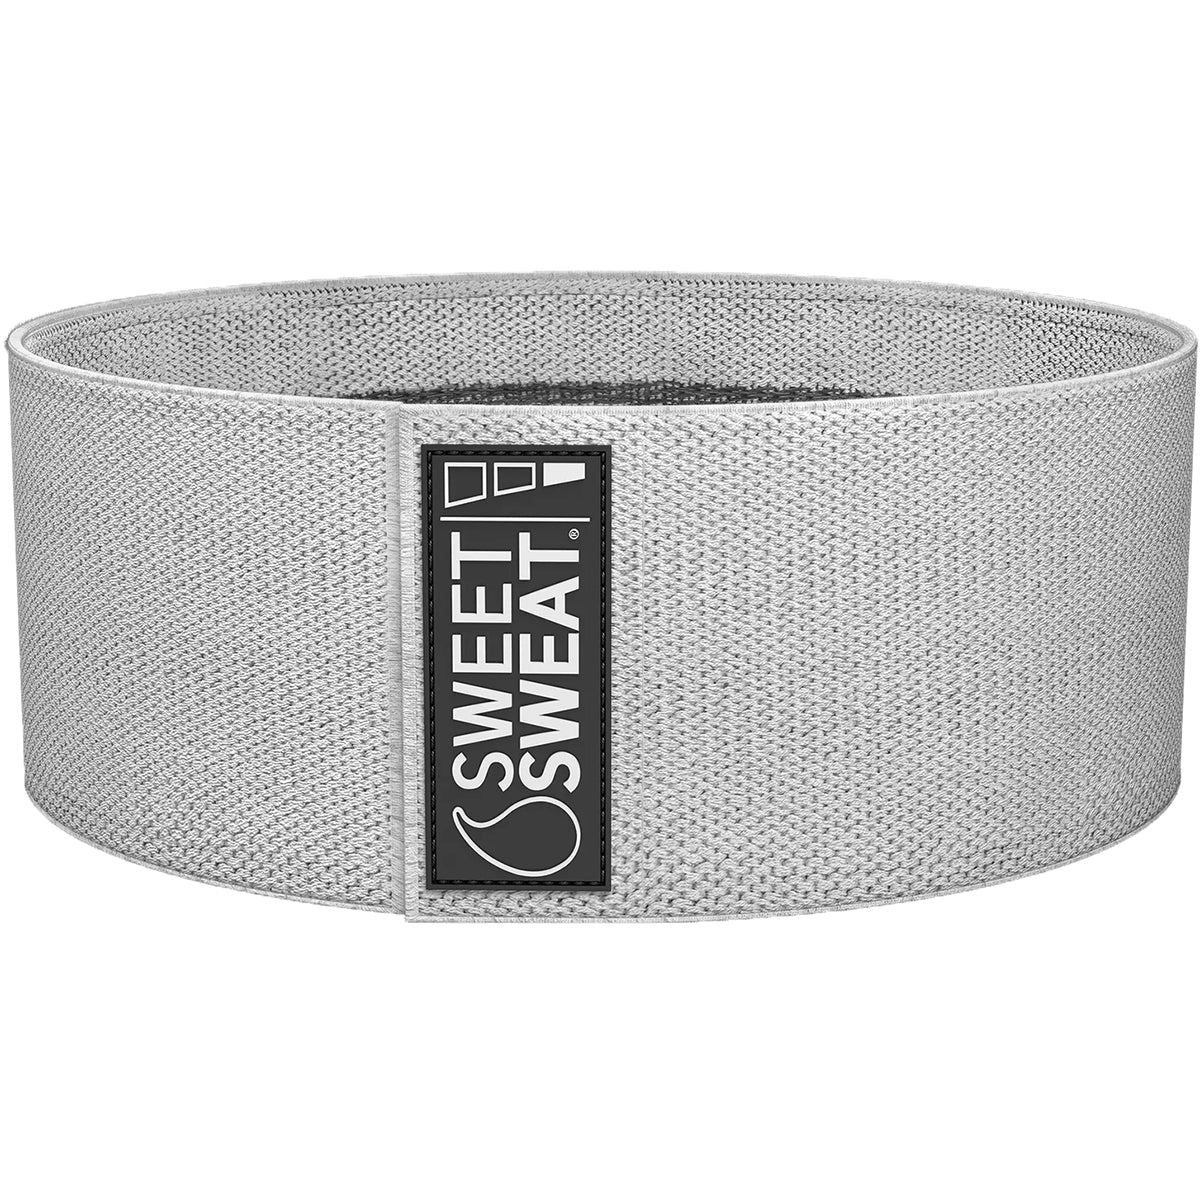 Sports Research Sweet Sweat Fitness Hip Bands - 3-Pack Sports Research